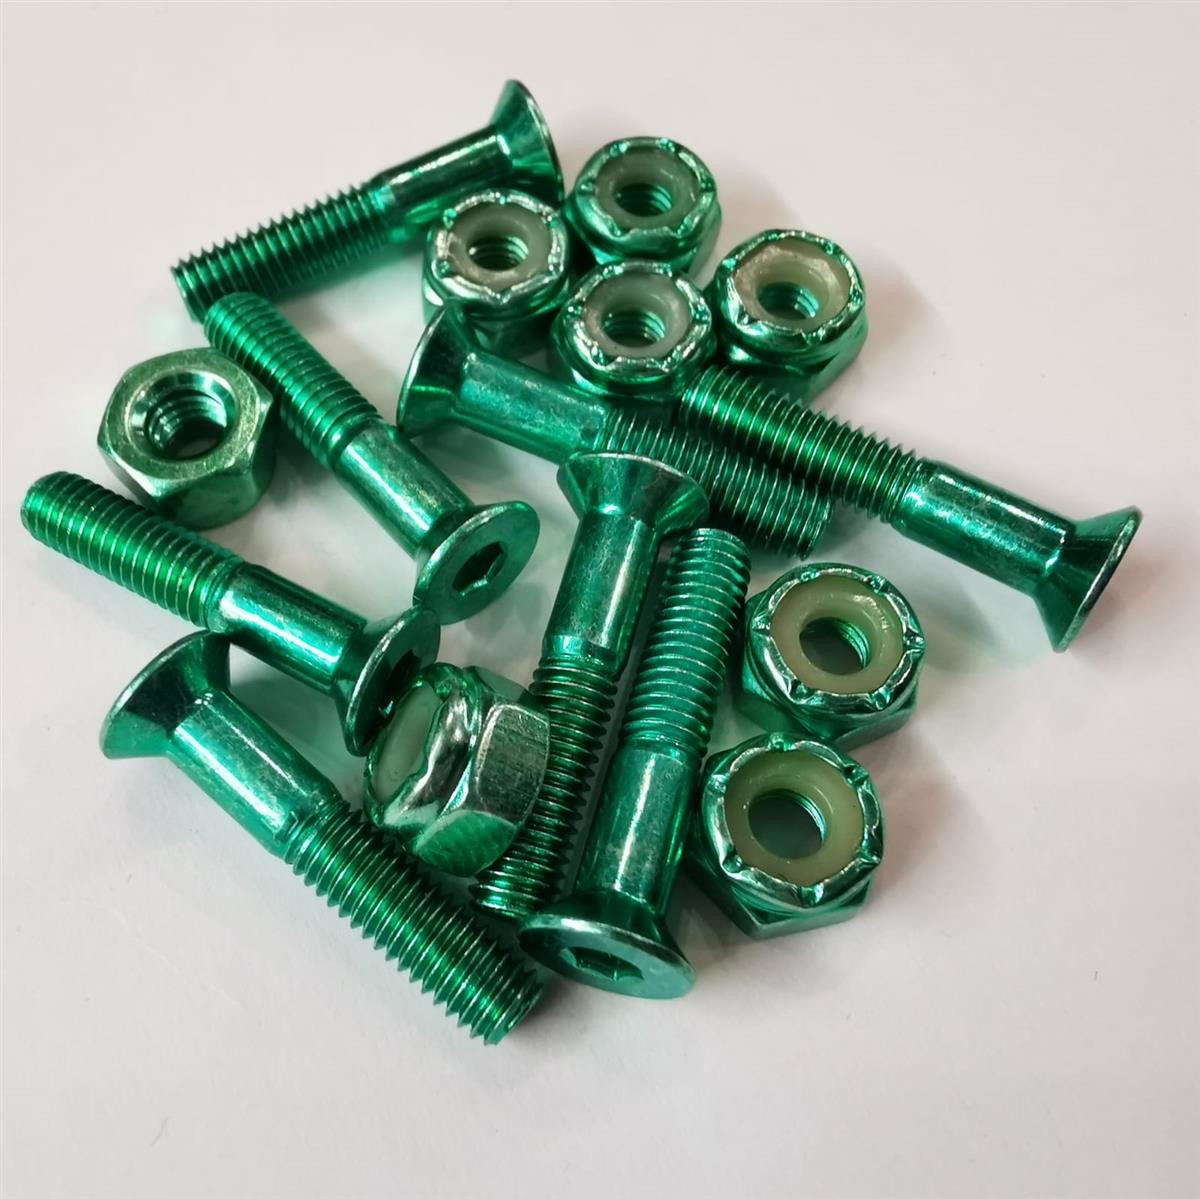 mounting set anodized green 1" nuts and bolts